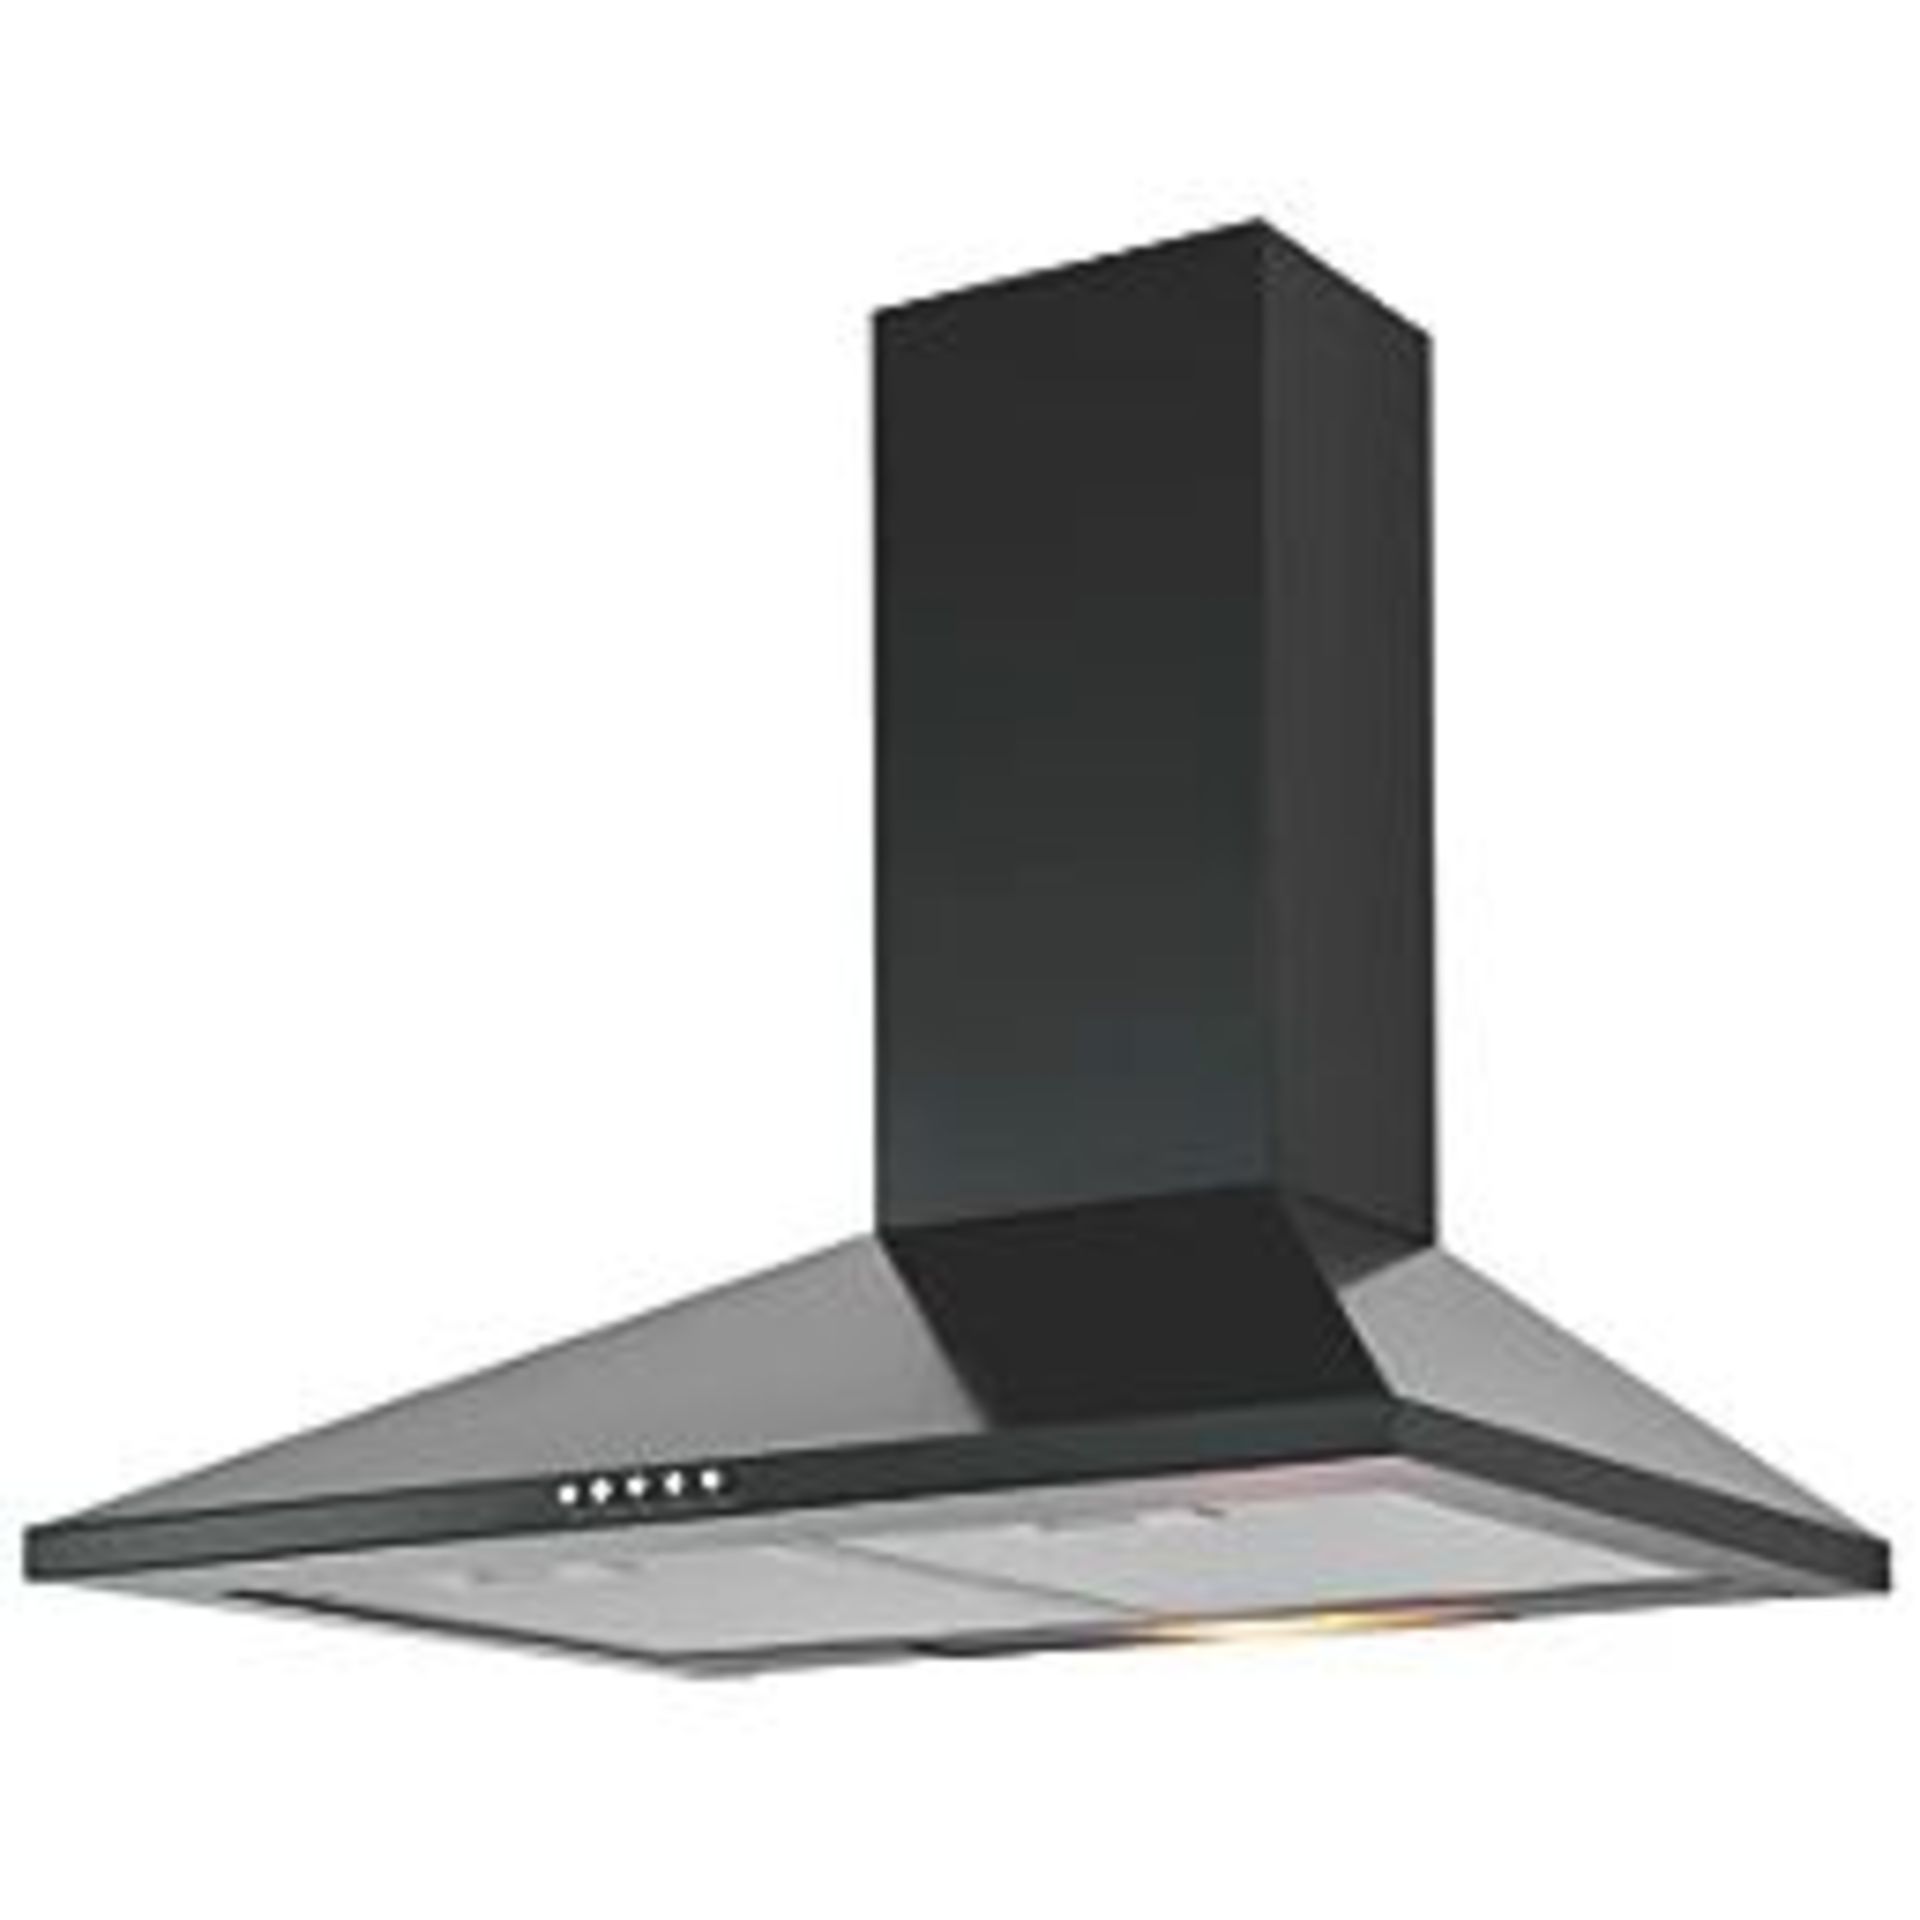 ADJUSTABLE CHIMNEY HOOD BLACK 600MM . - R9BW. Height-adjustable extractor hood with integrated LED